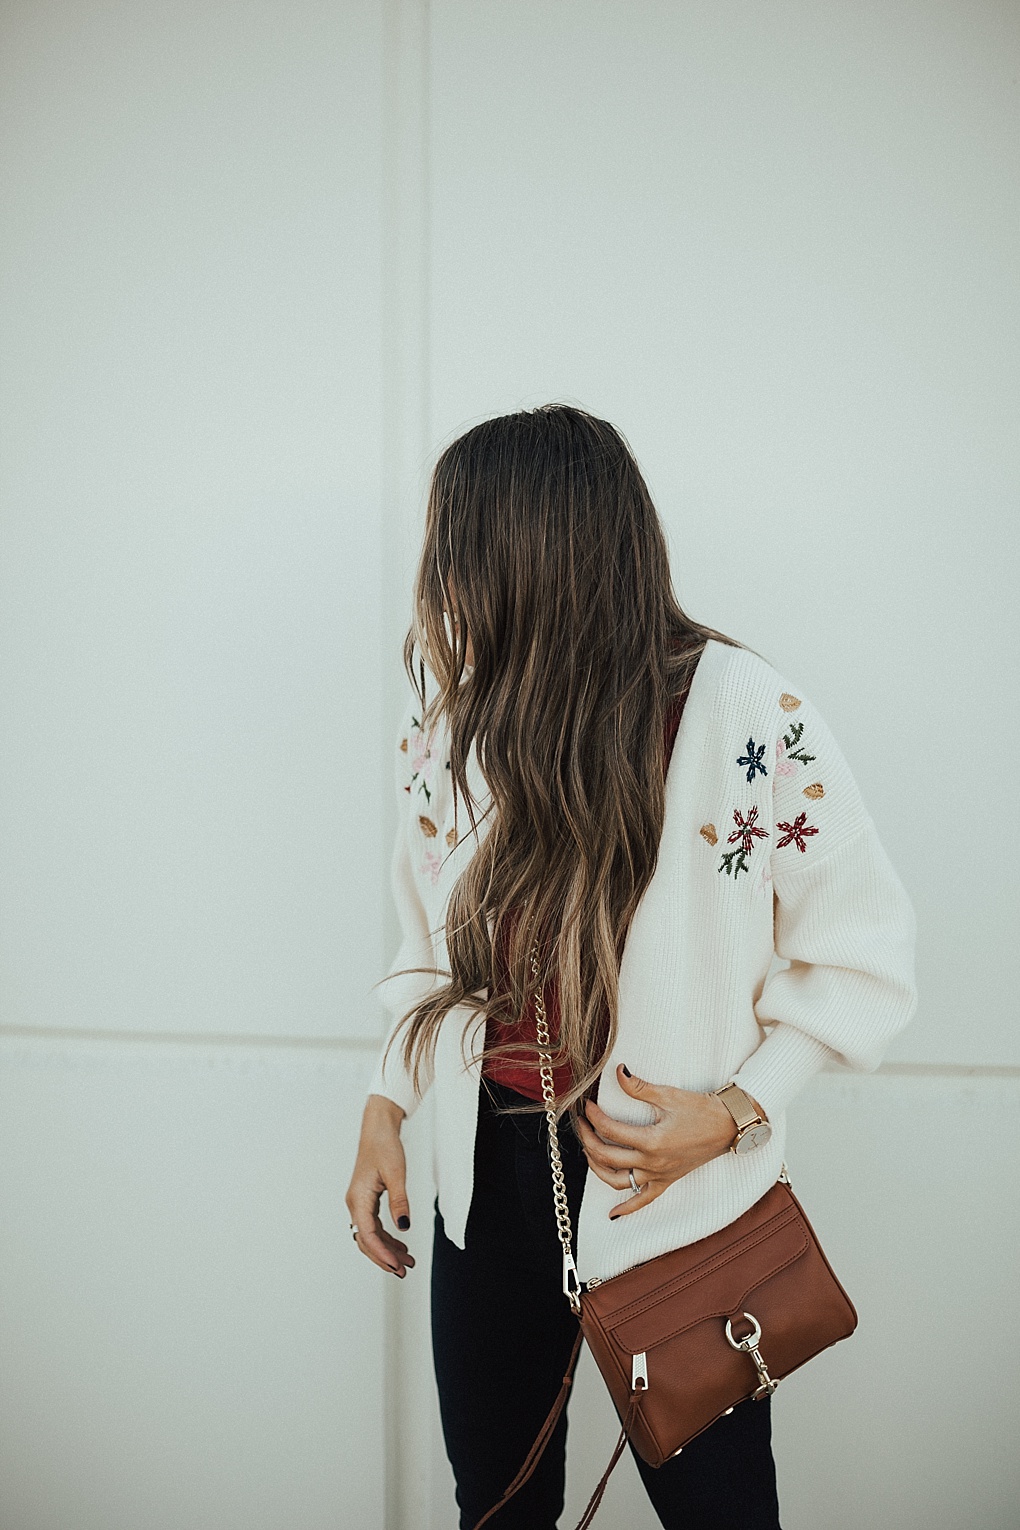 The Embroidered Cardigan Your Grandma Has & You Need Too by popular Utah style blogger Dani Marie